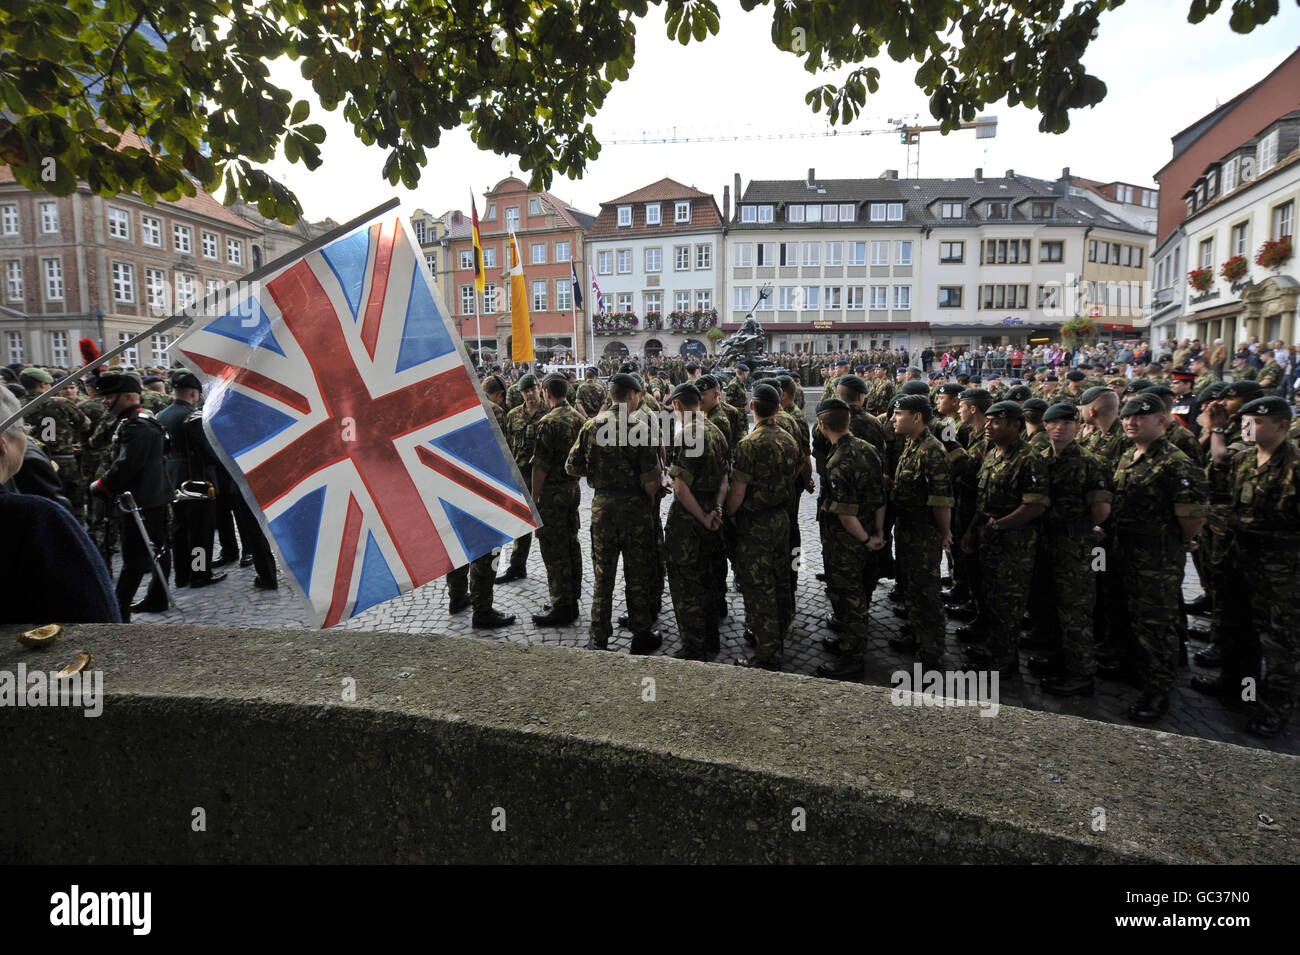 A Union flag is seen flying as over 500 soldiers from 20th Armoured Brigade - the Iron Fist, mark their return from operations in Iraq, Afghanistan and Kosovo by parading through their Garrison town of Paderborn in front of hundreds of spectators from both the local German community and soldier's families and friends. Stock Photo